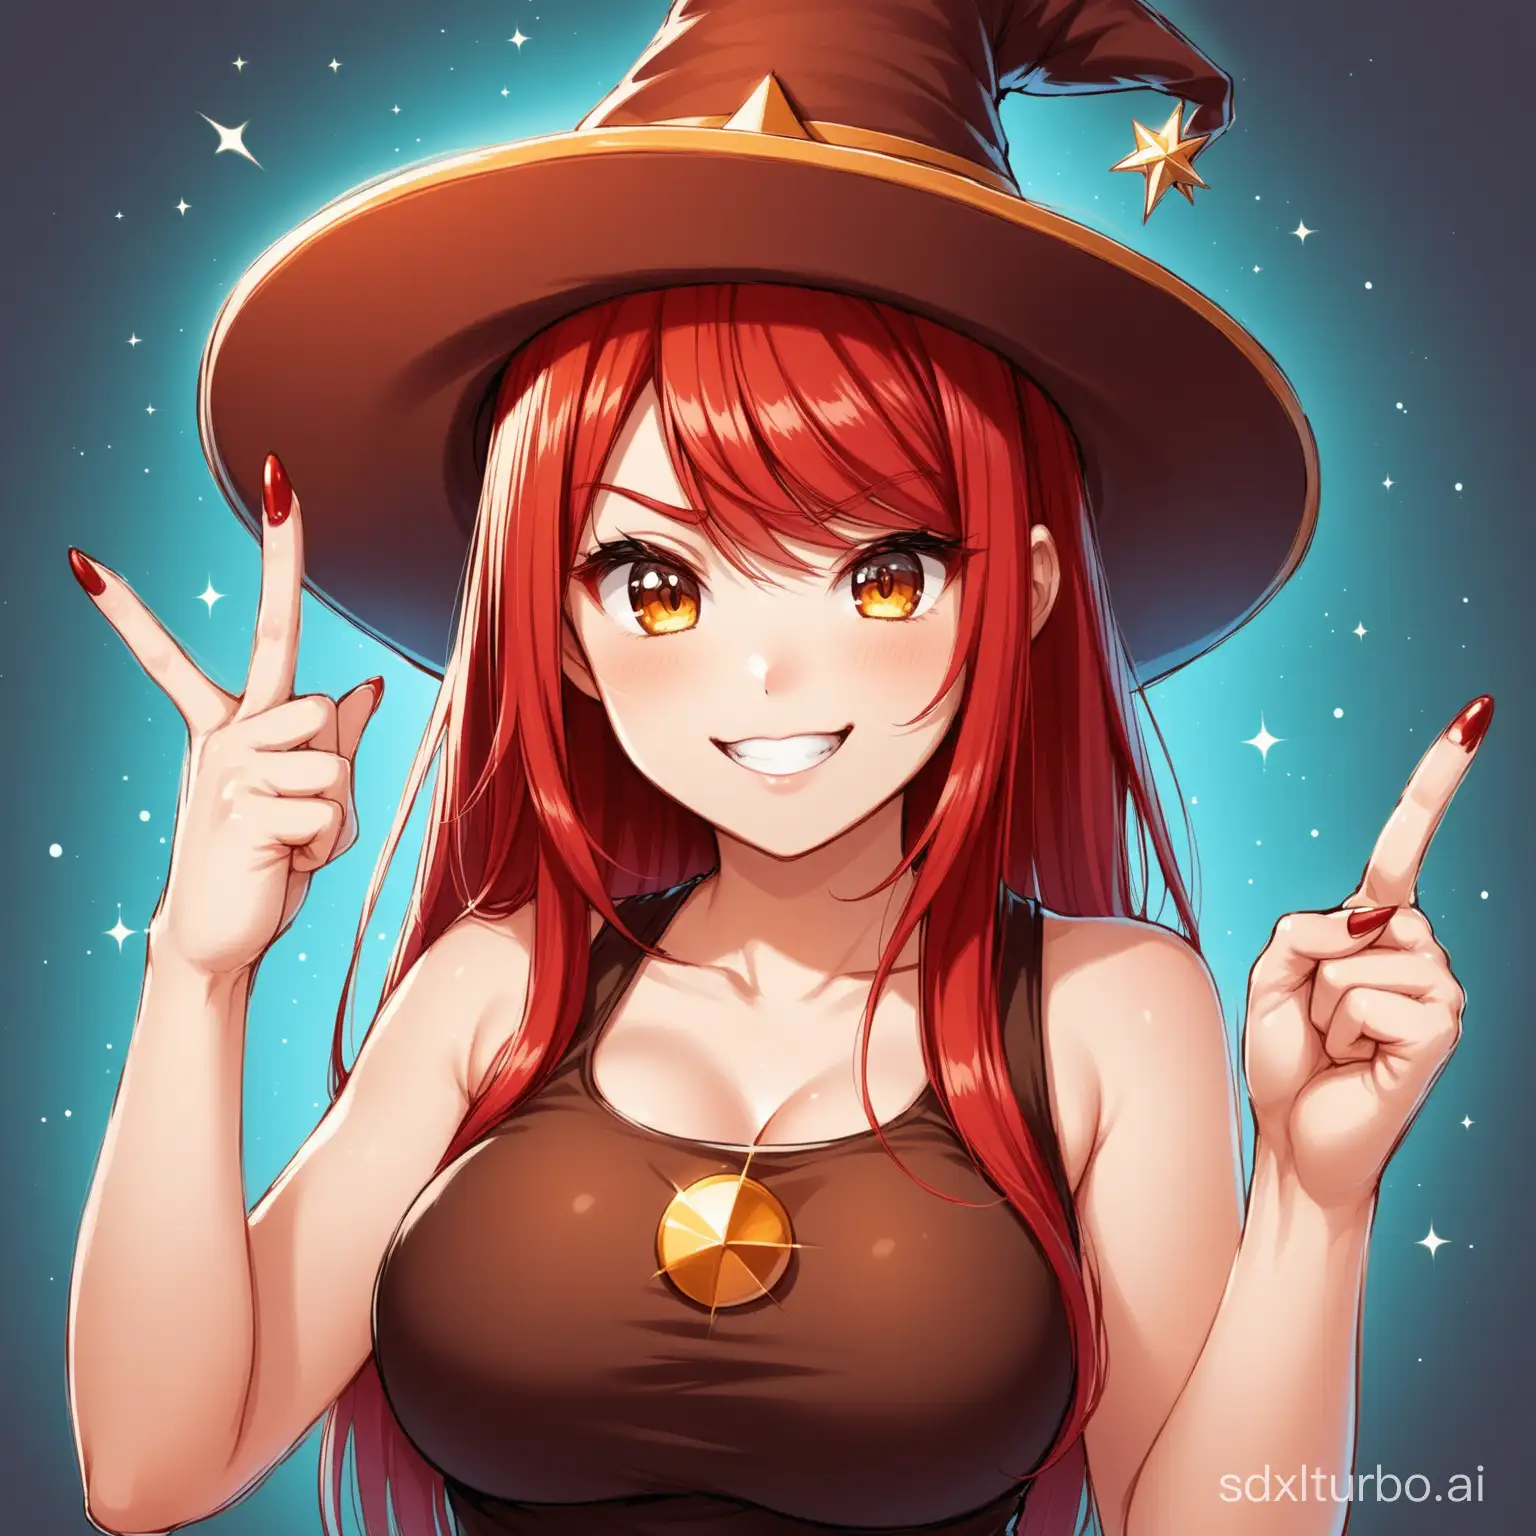 Beautiful girl with red hair wearing brown magic hat doing a middle finger